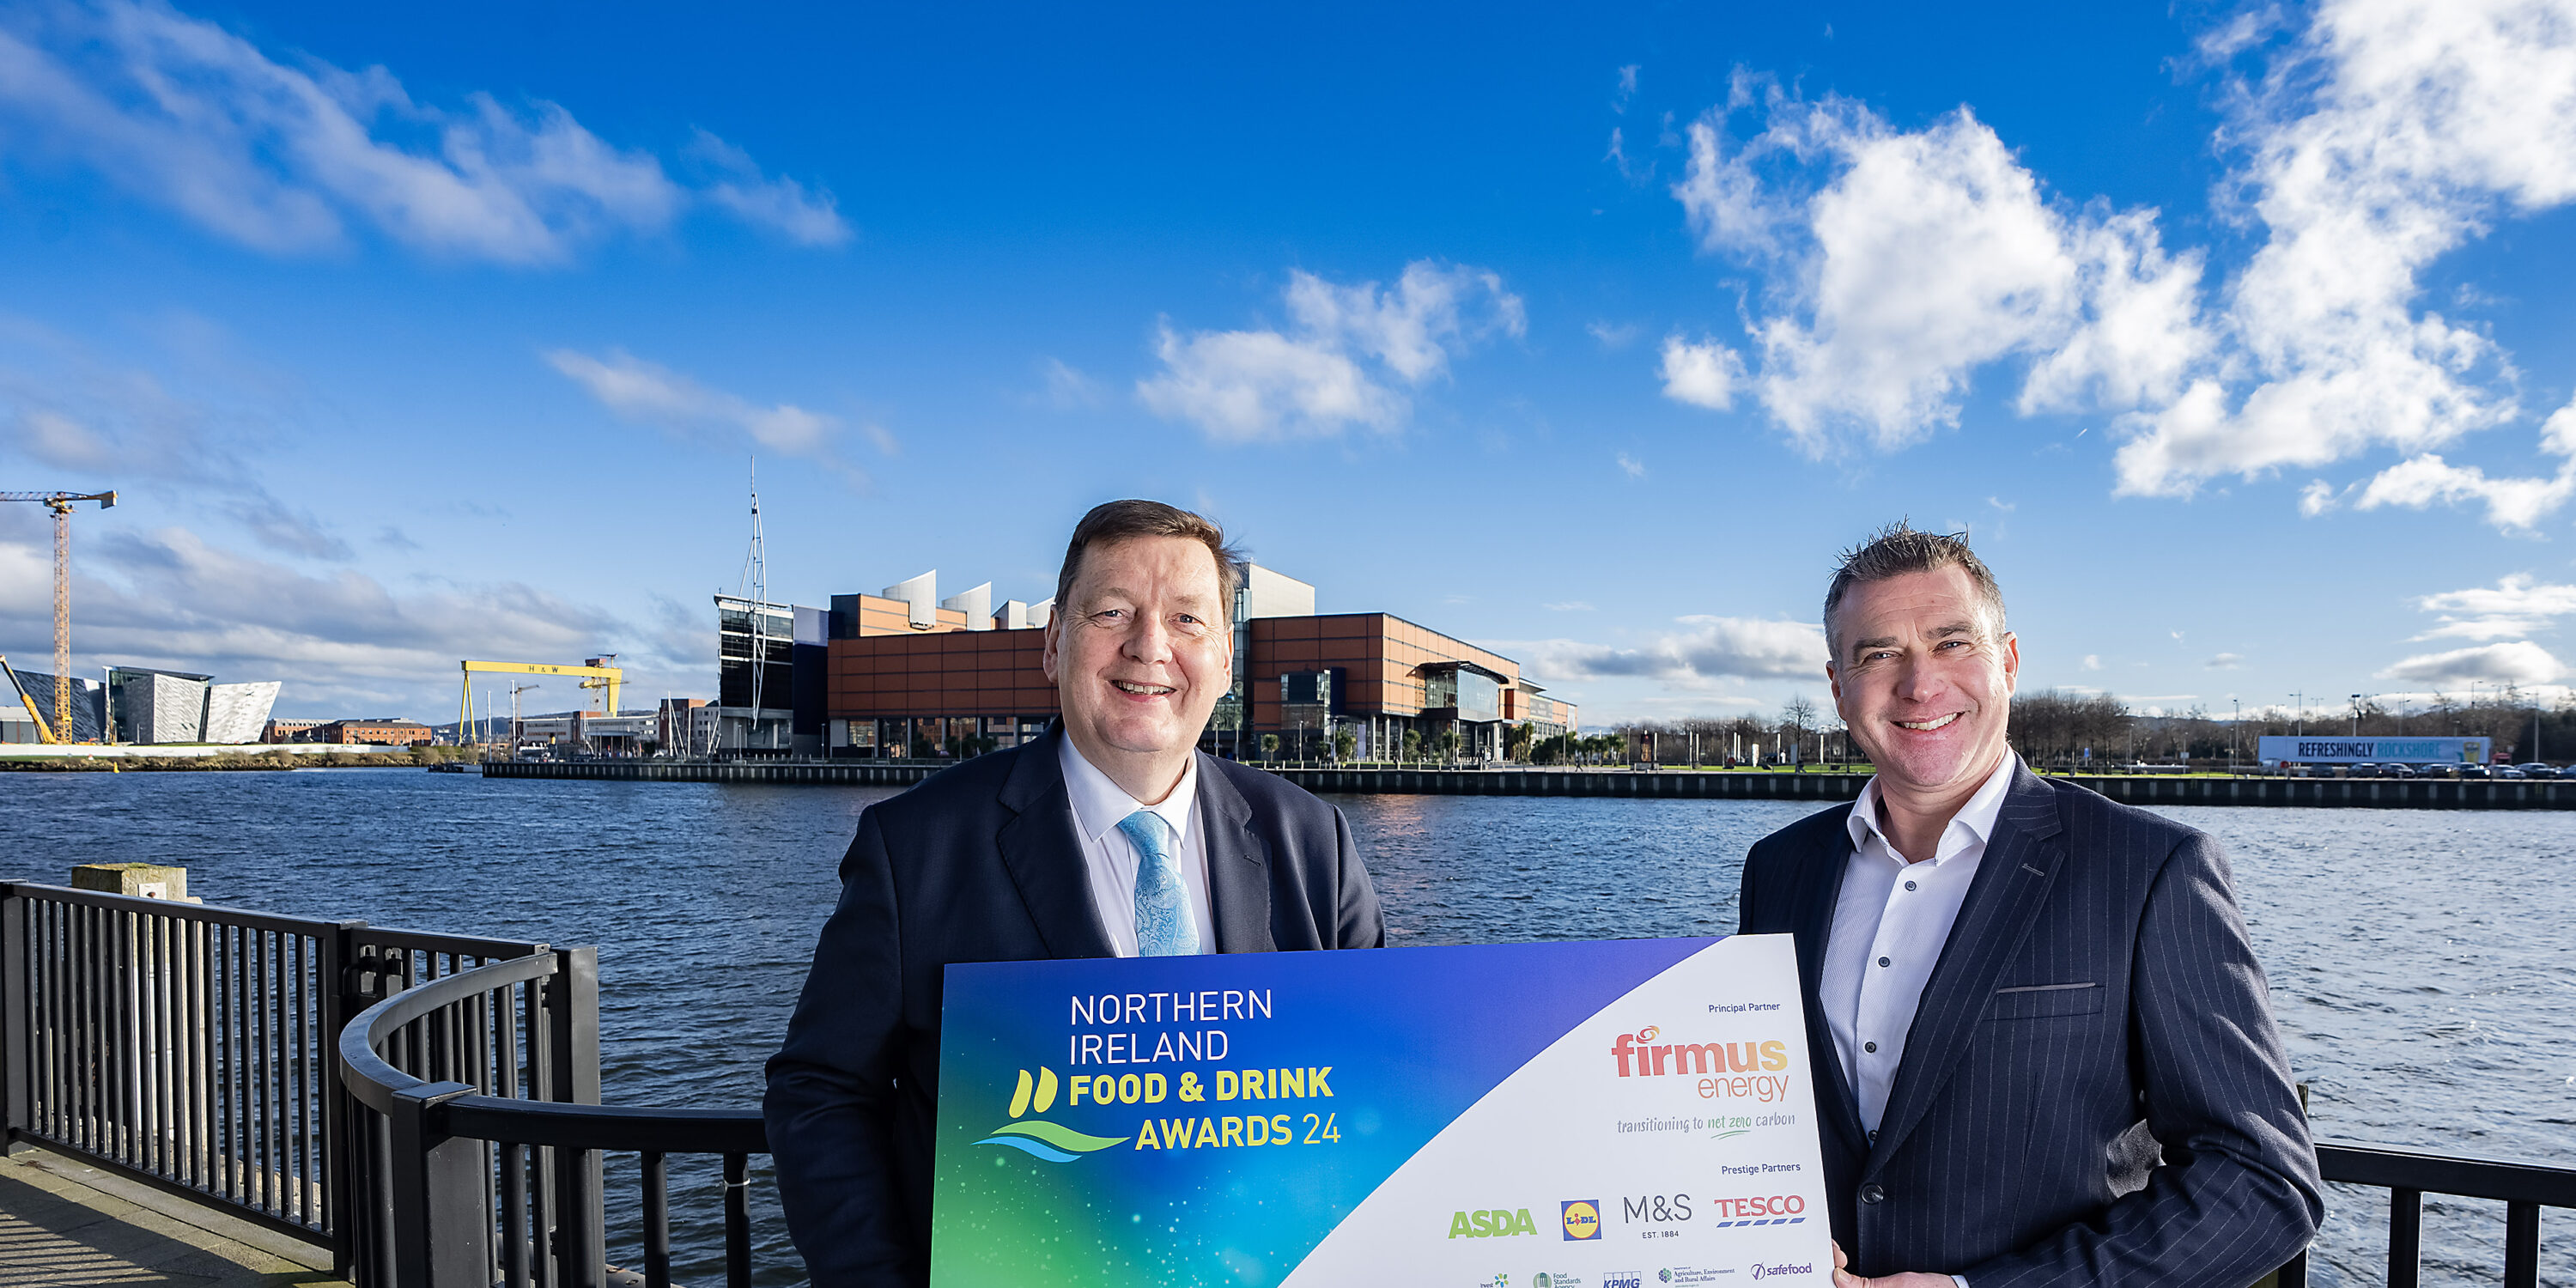 Michael Bell Launches NIFDA Awards 24